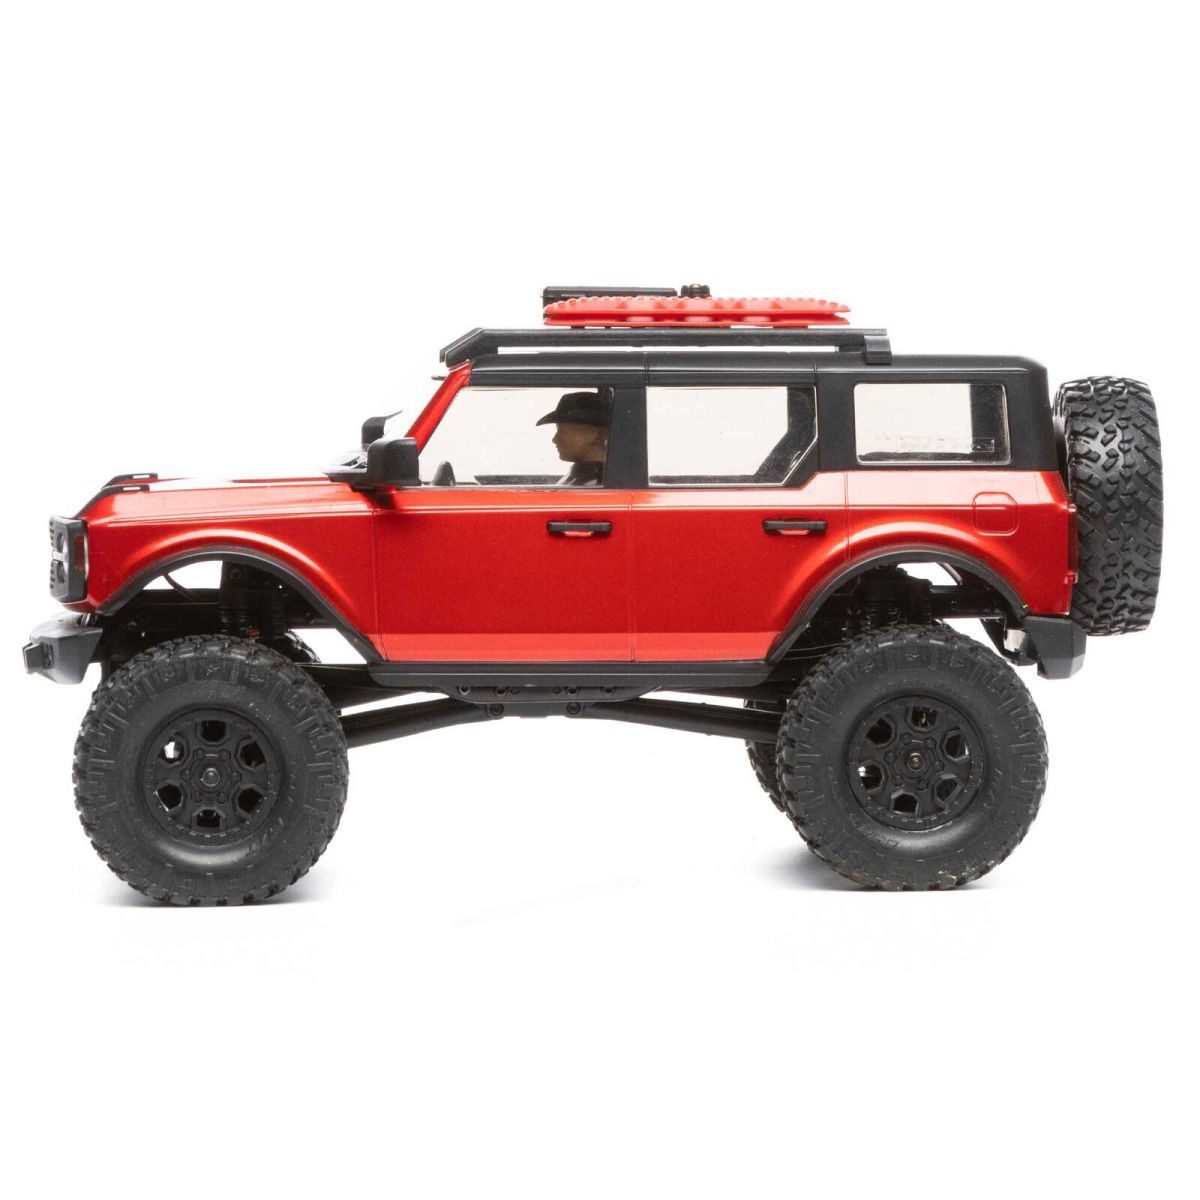 An image of the Axial Ford Bronco Truck